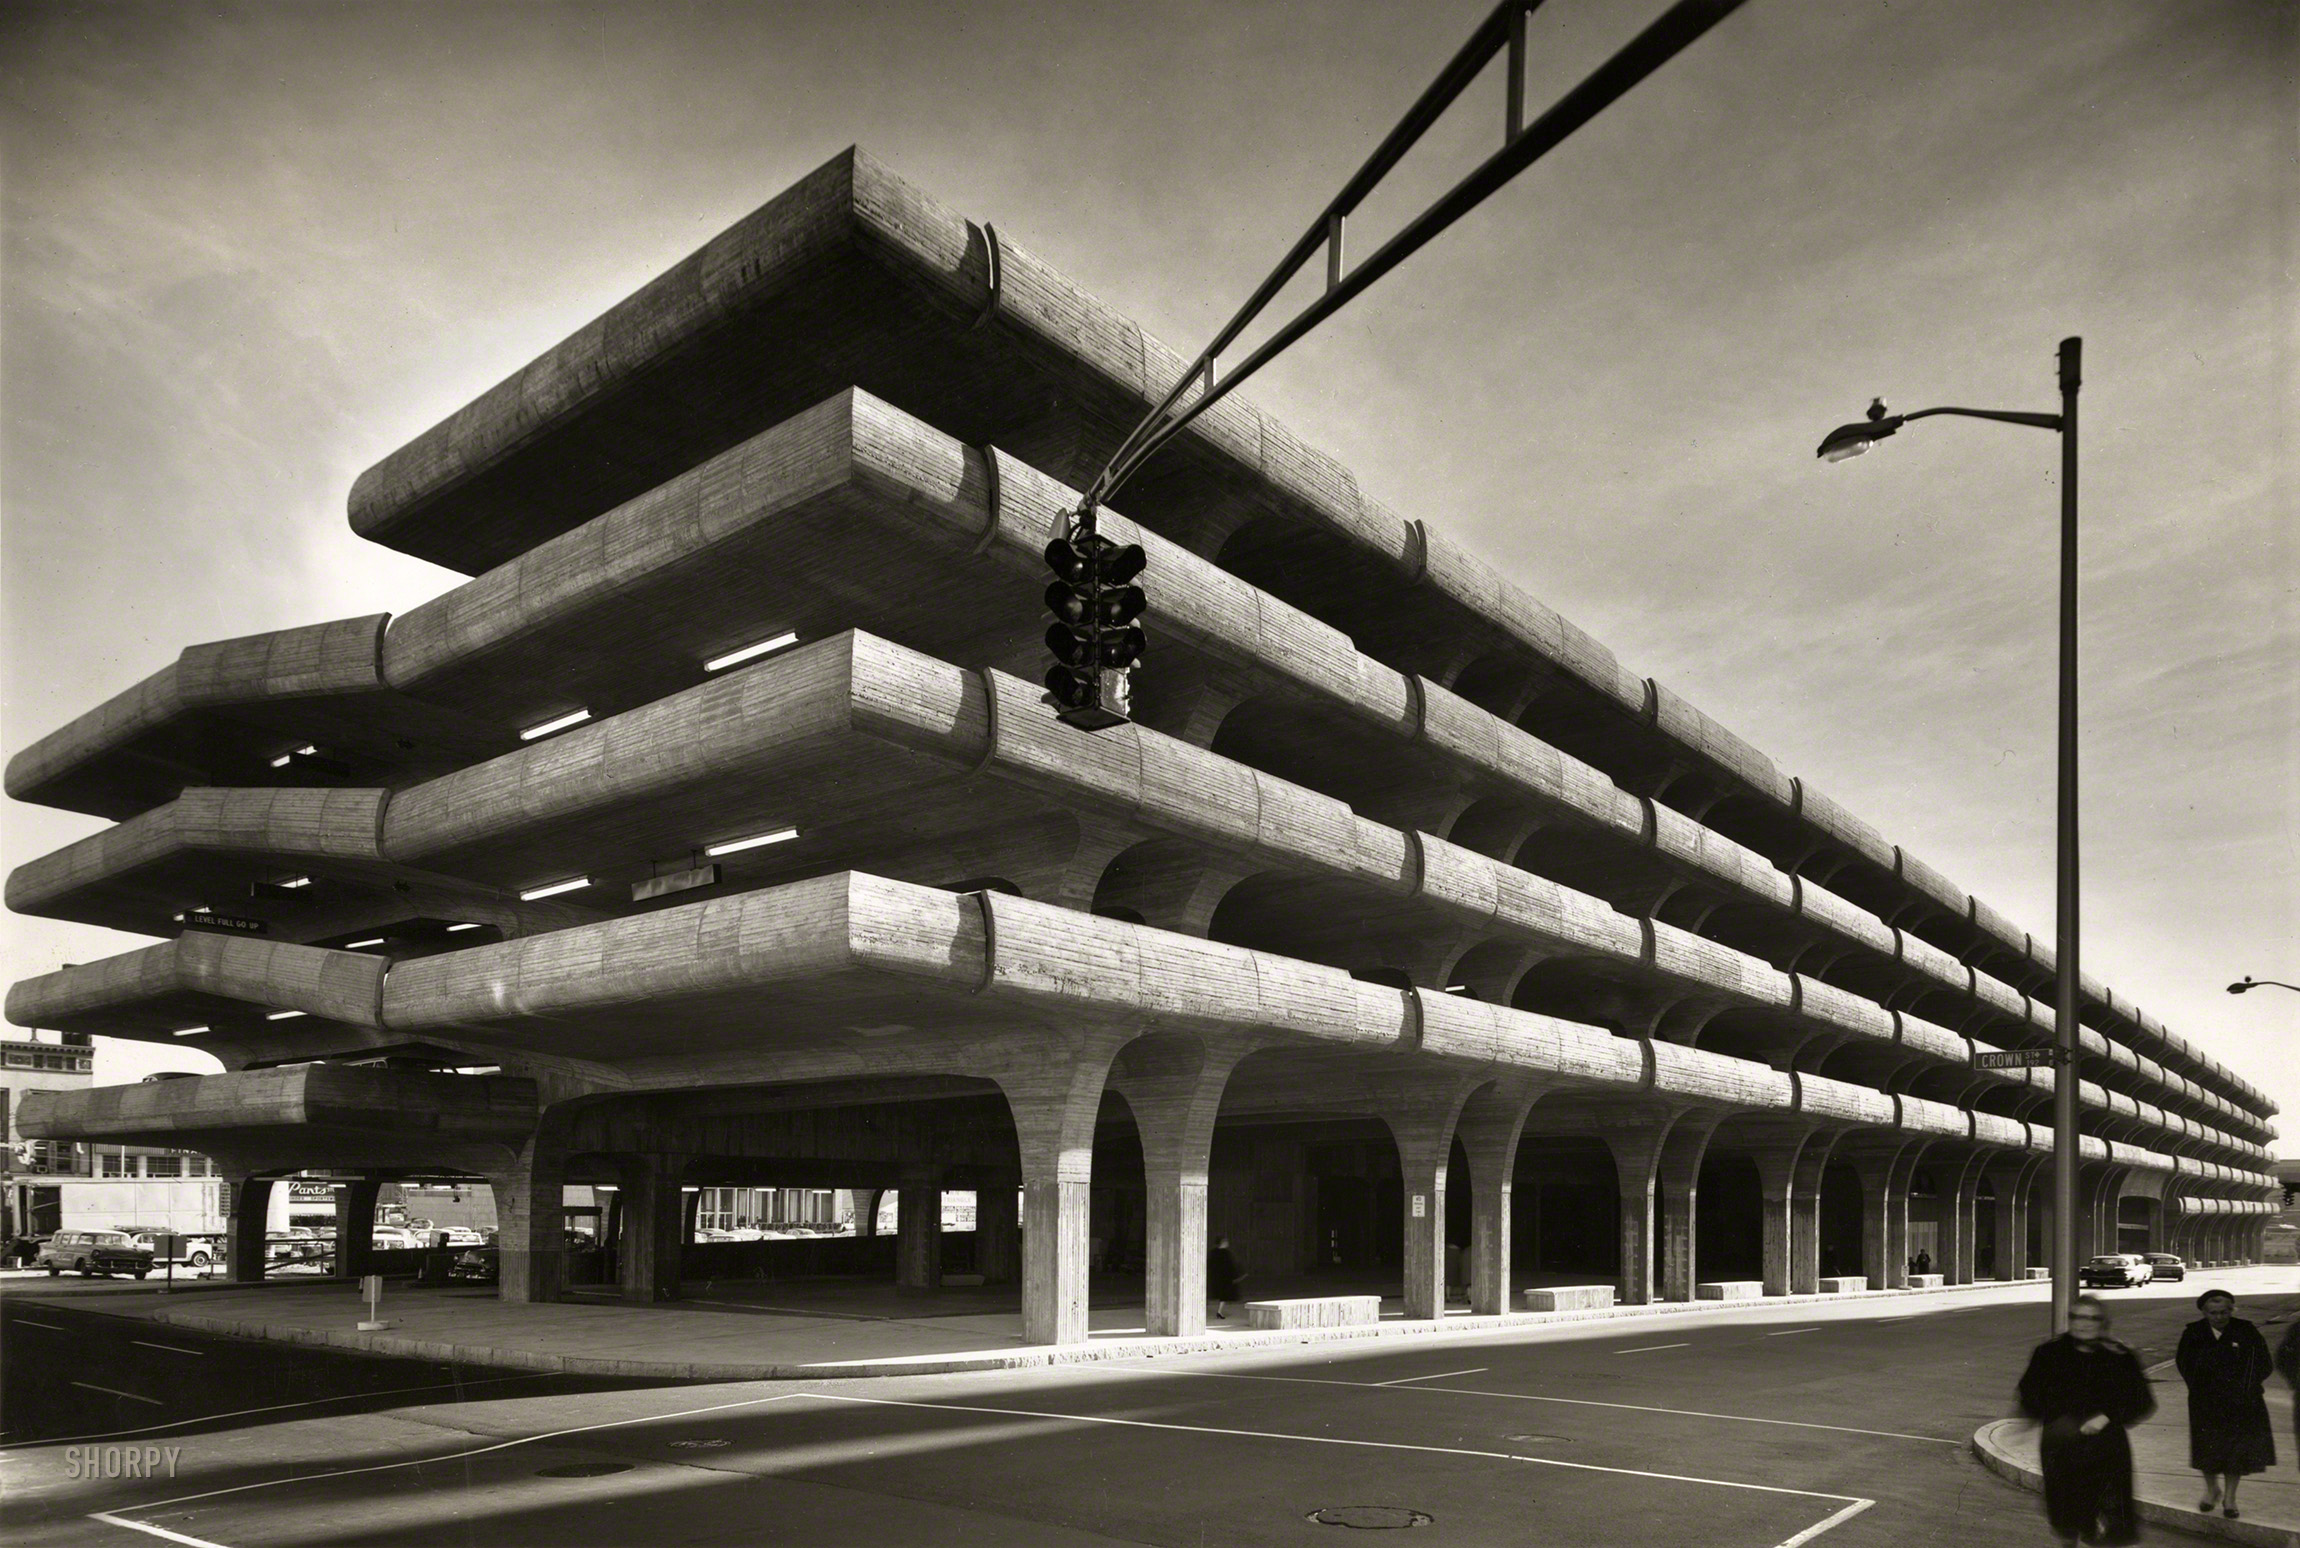 1963. "Parking structure, New Haven, Connecticut. Temple Street Garage, exterior. Paul Rudolph, architect." Photo by Ezra Stoller. View full size.